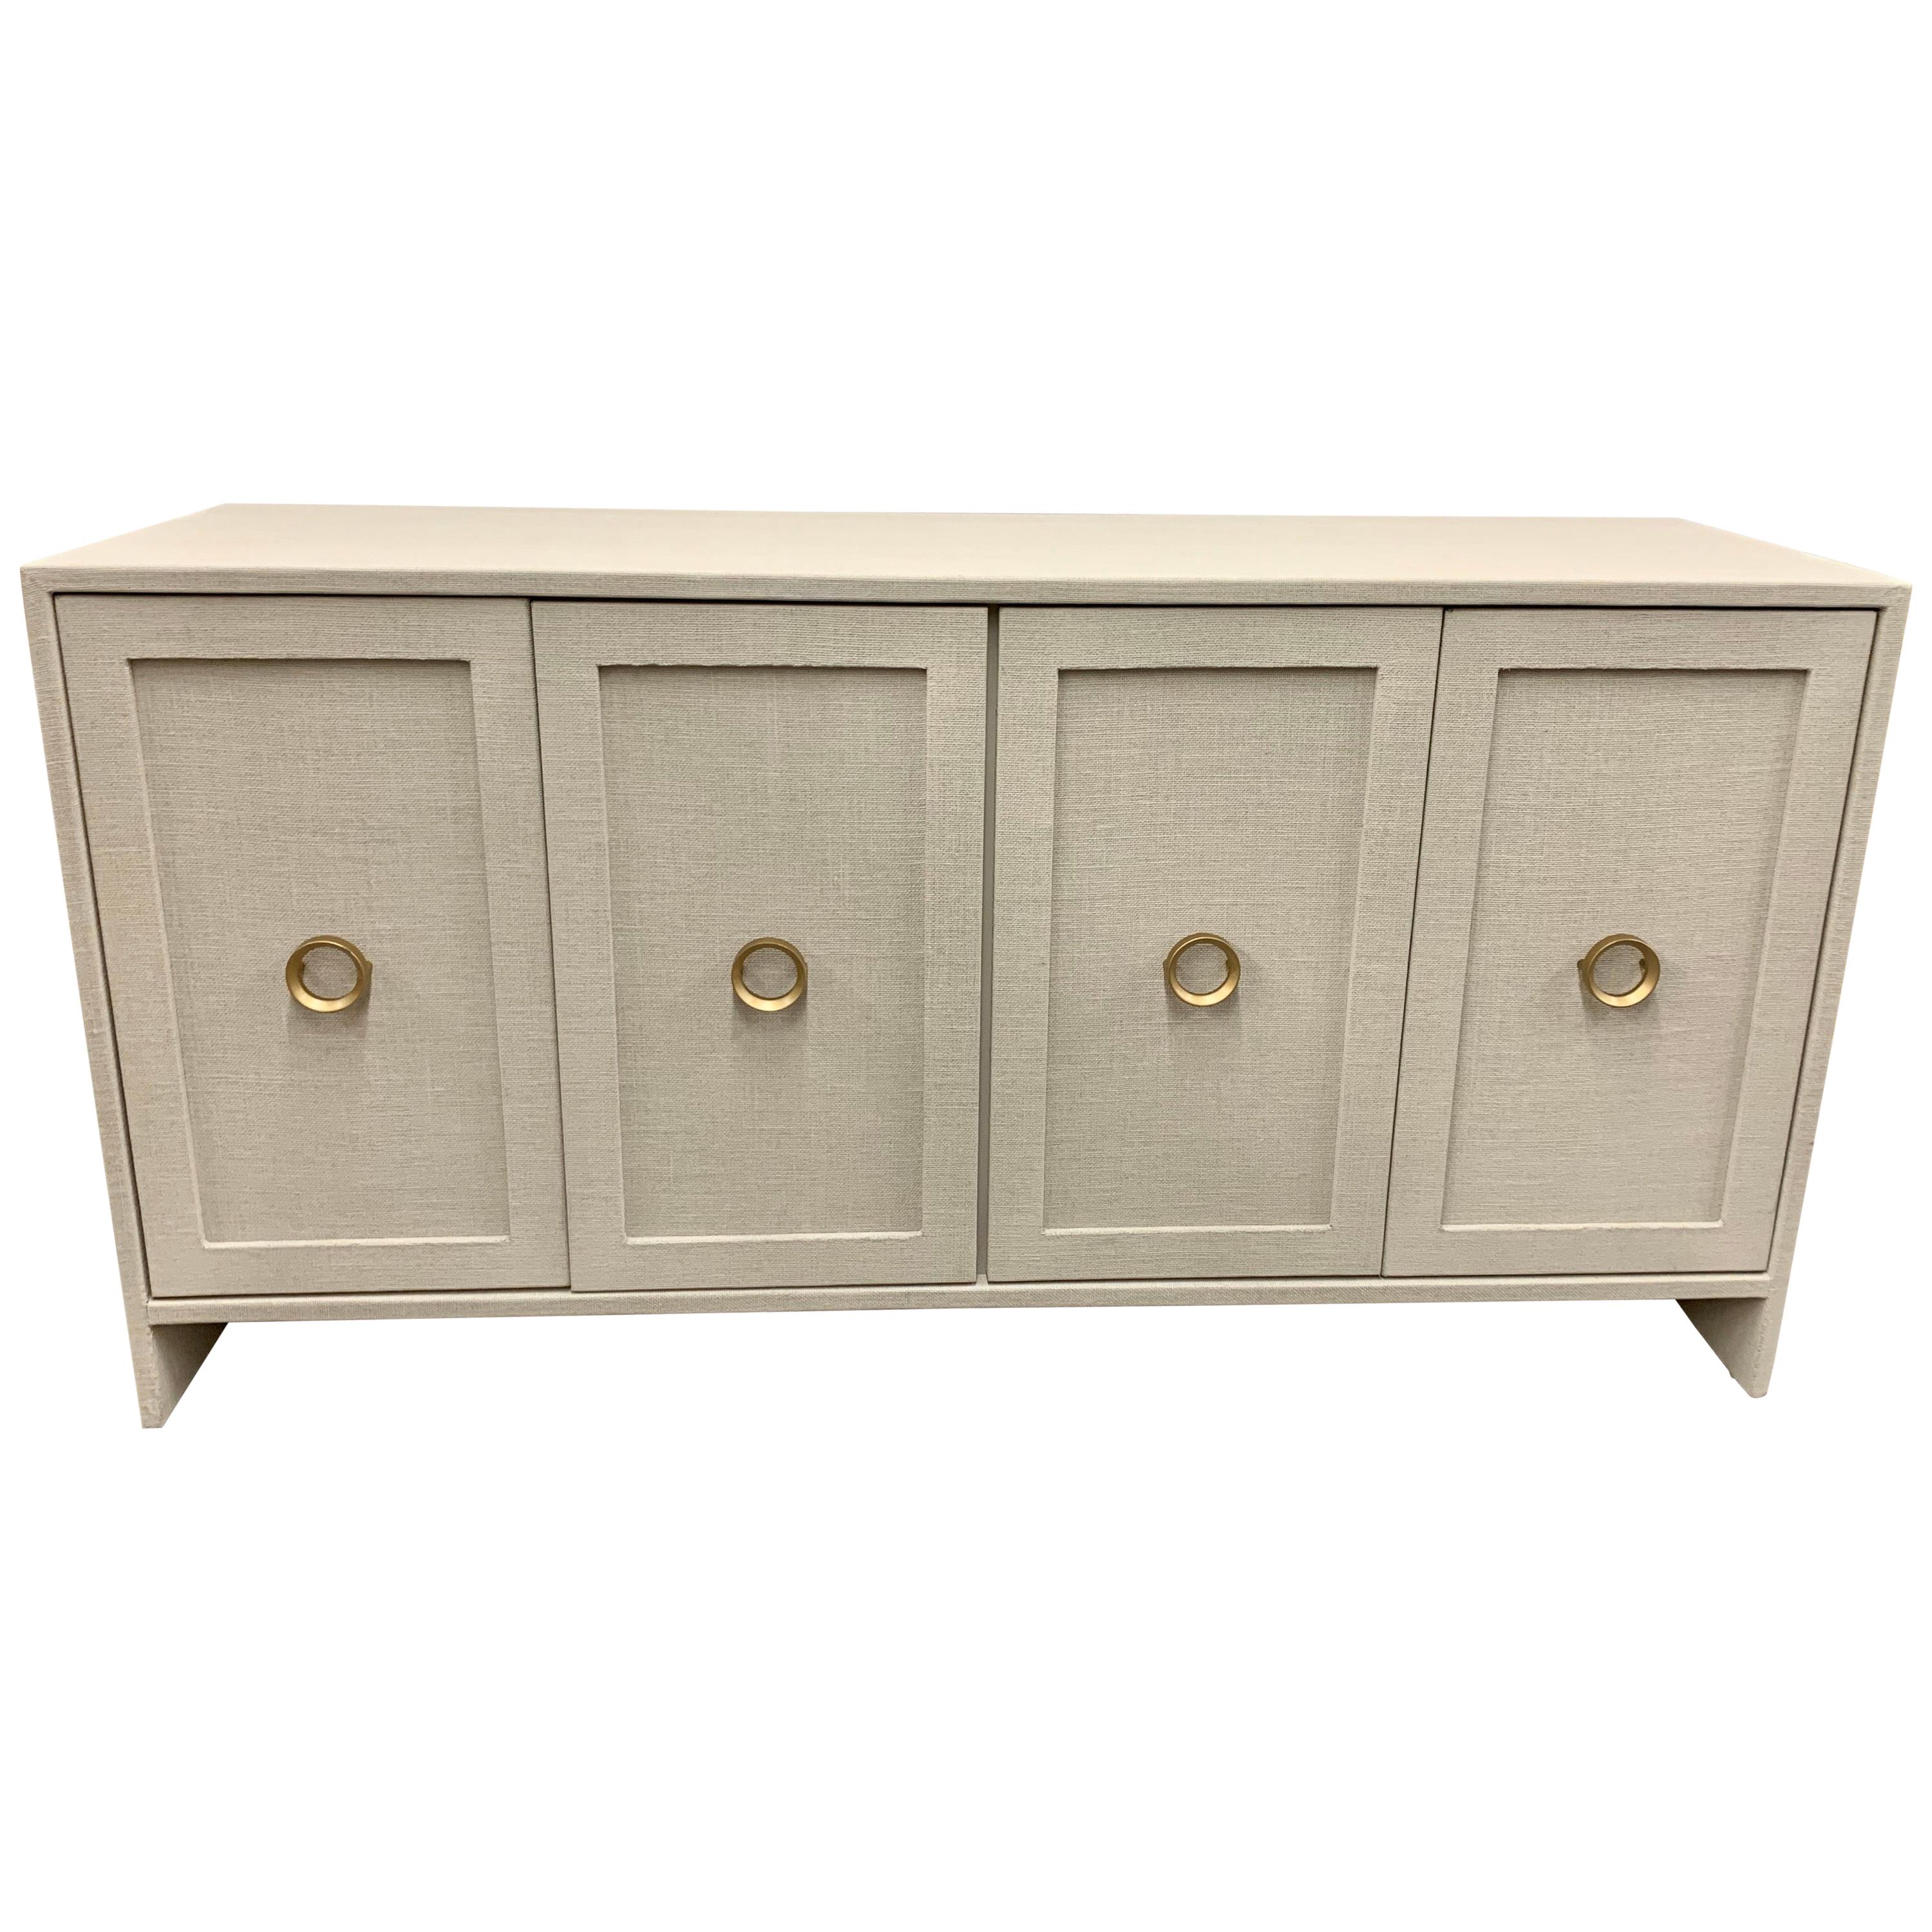 Modern Custom Four-Door Linen Wrapped Credenza Sideboard Server Buffet Console